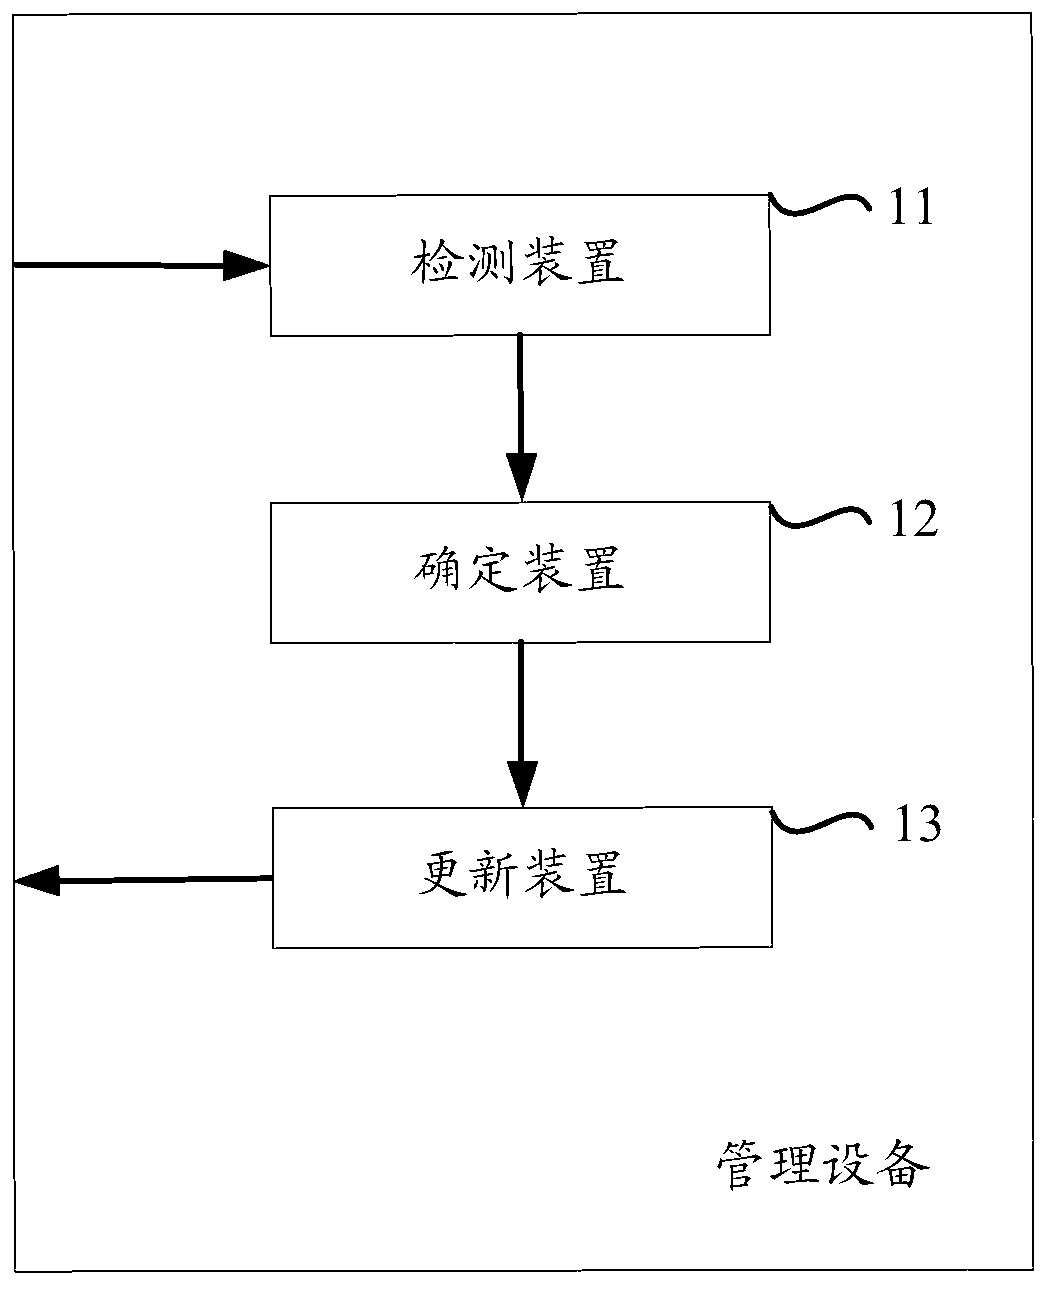 A method and device for managing data sets